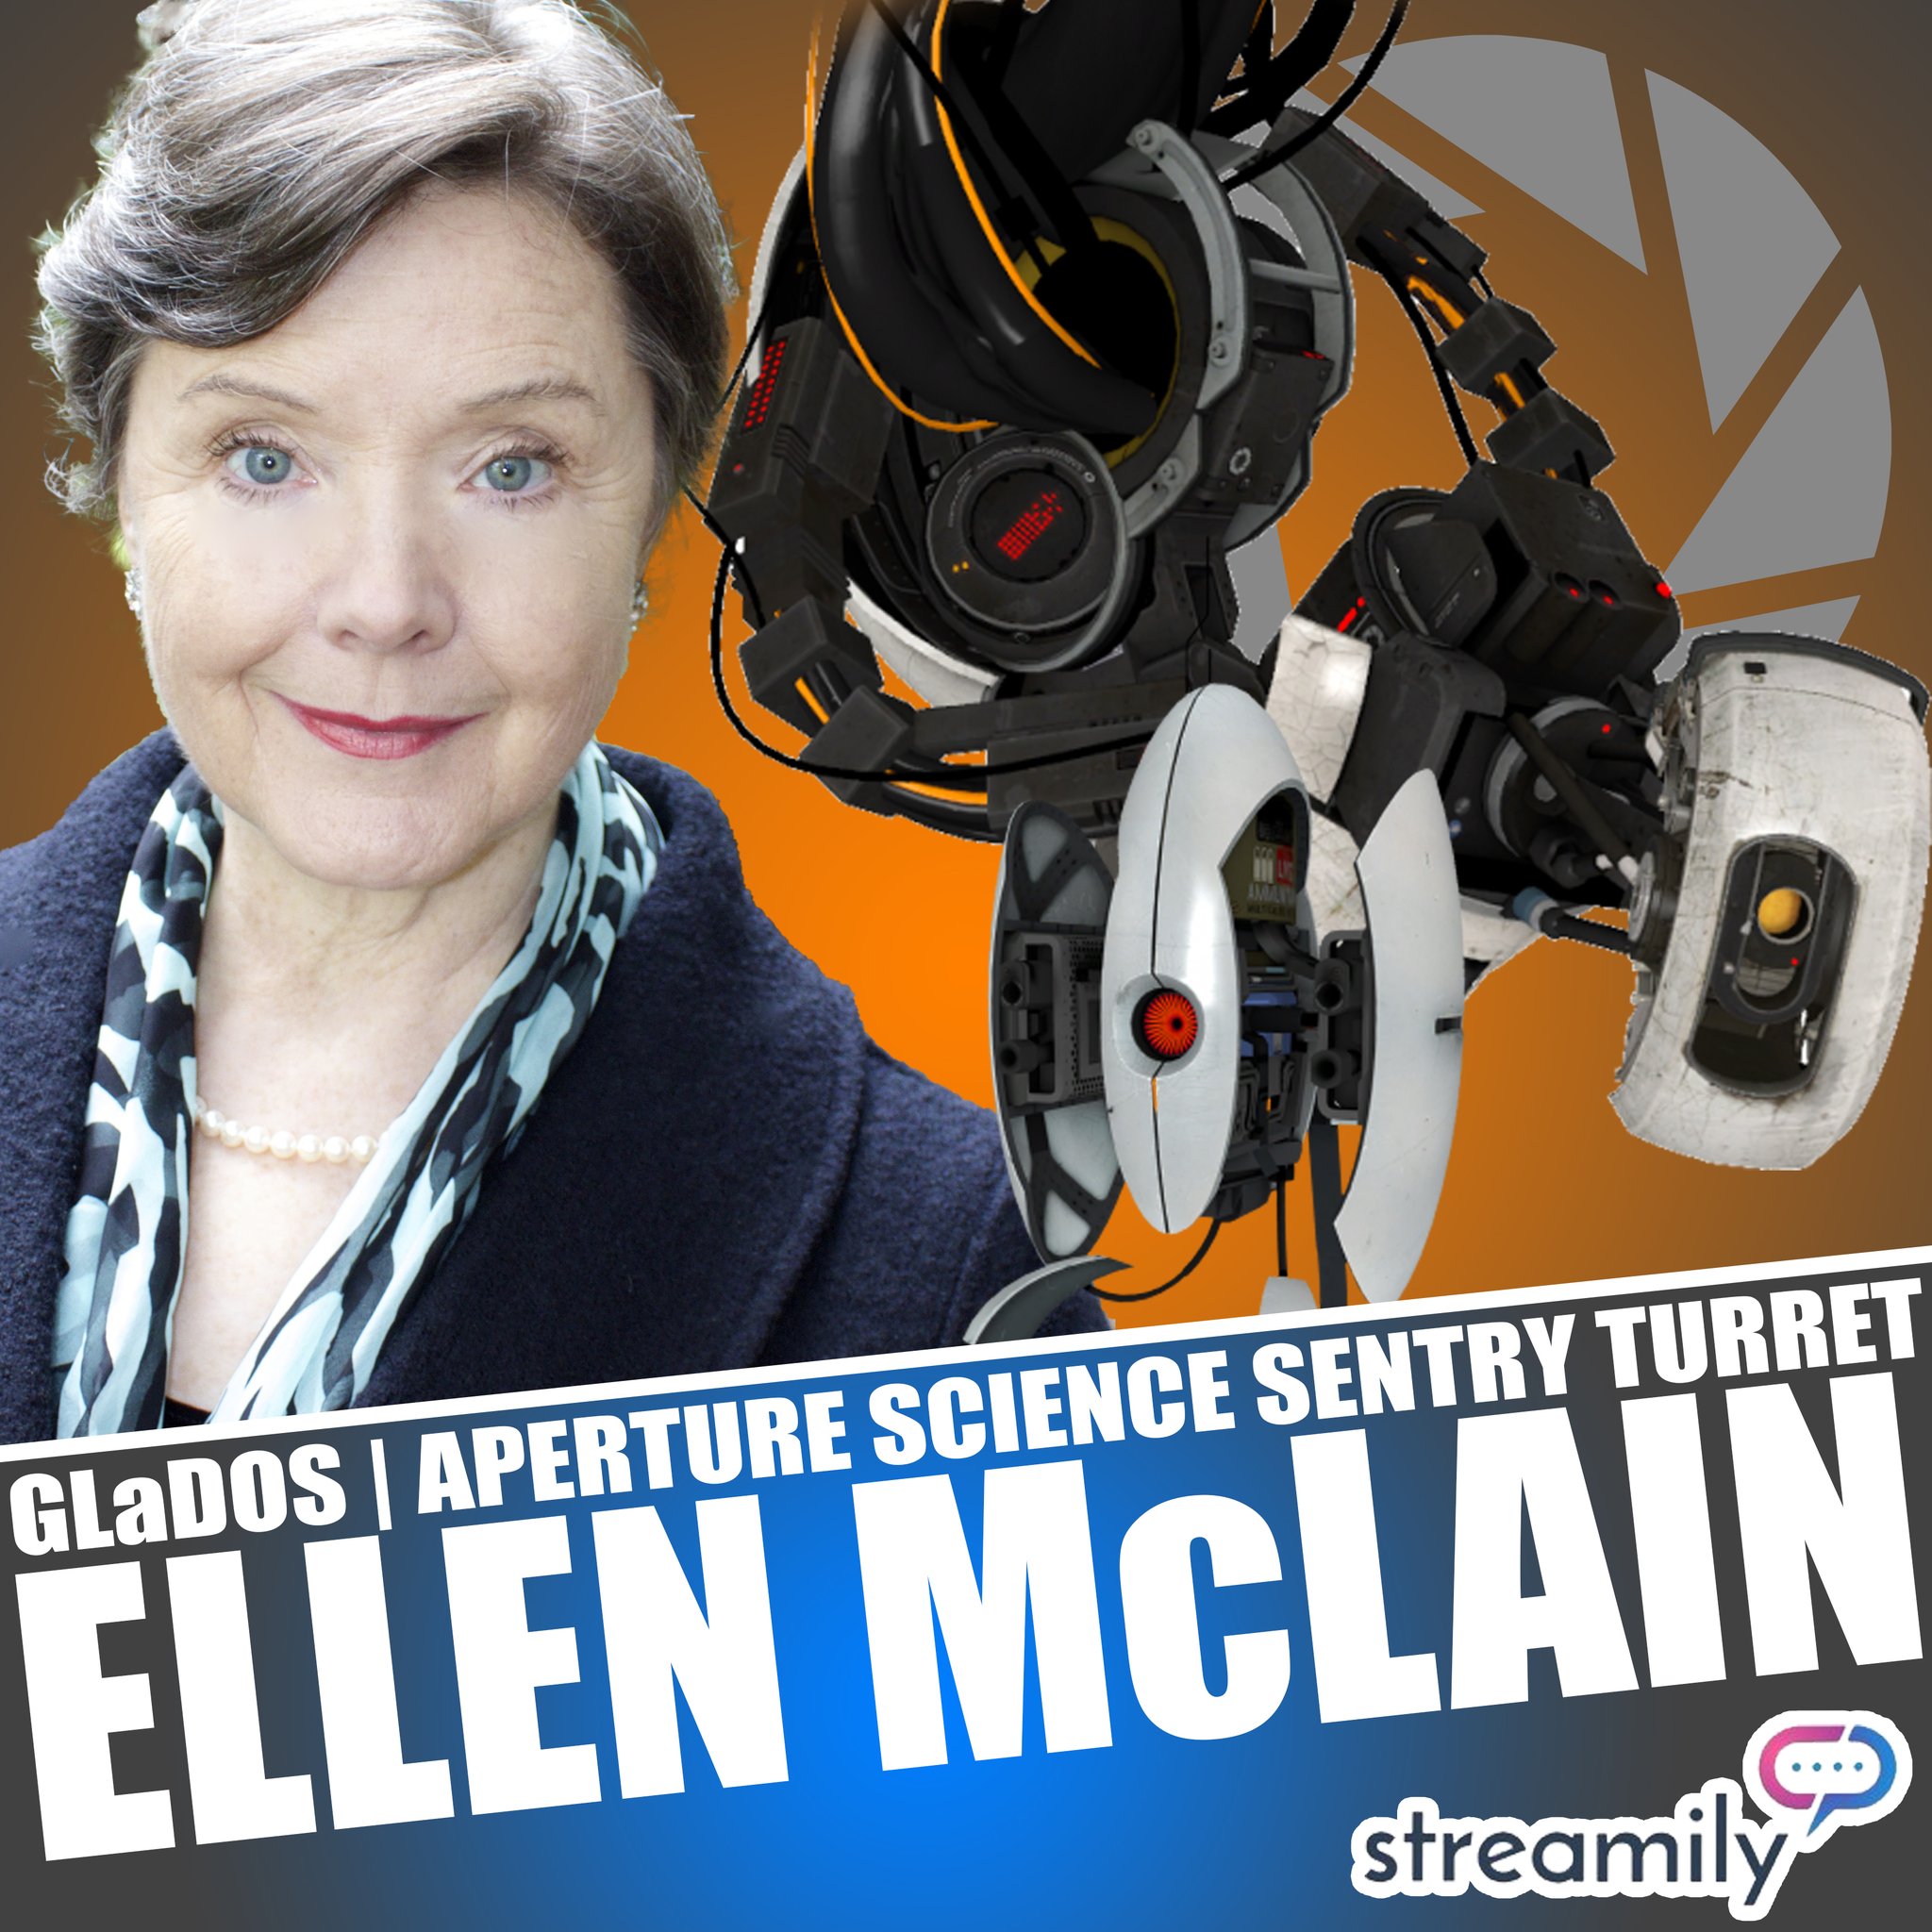 Ellen McLain on X: "Join @johnpatricklowr and me next Saturday June 19 at  10AM PST for a live autograph signing on @StreamilyLive's IG account!  #Portal #Valve #TF2 https://t.co/4FYA5Ckbrh https://t.co/gcU1x3NmWS  https://t.co/f8wYI6lQRu" / X